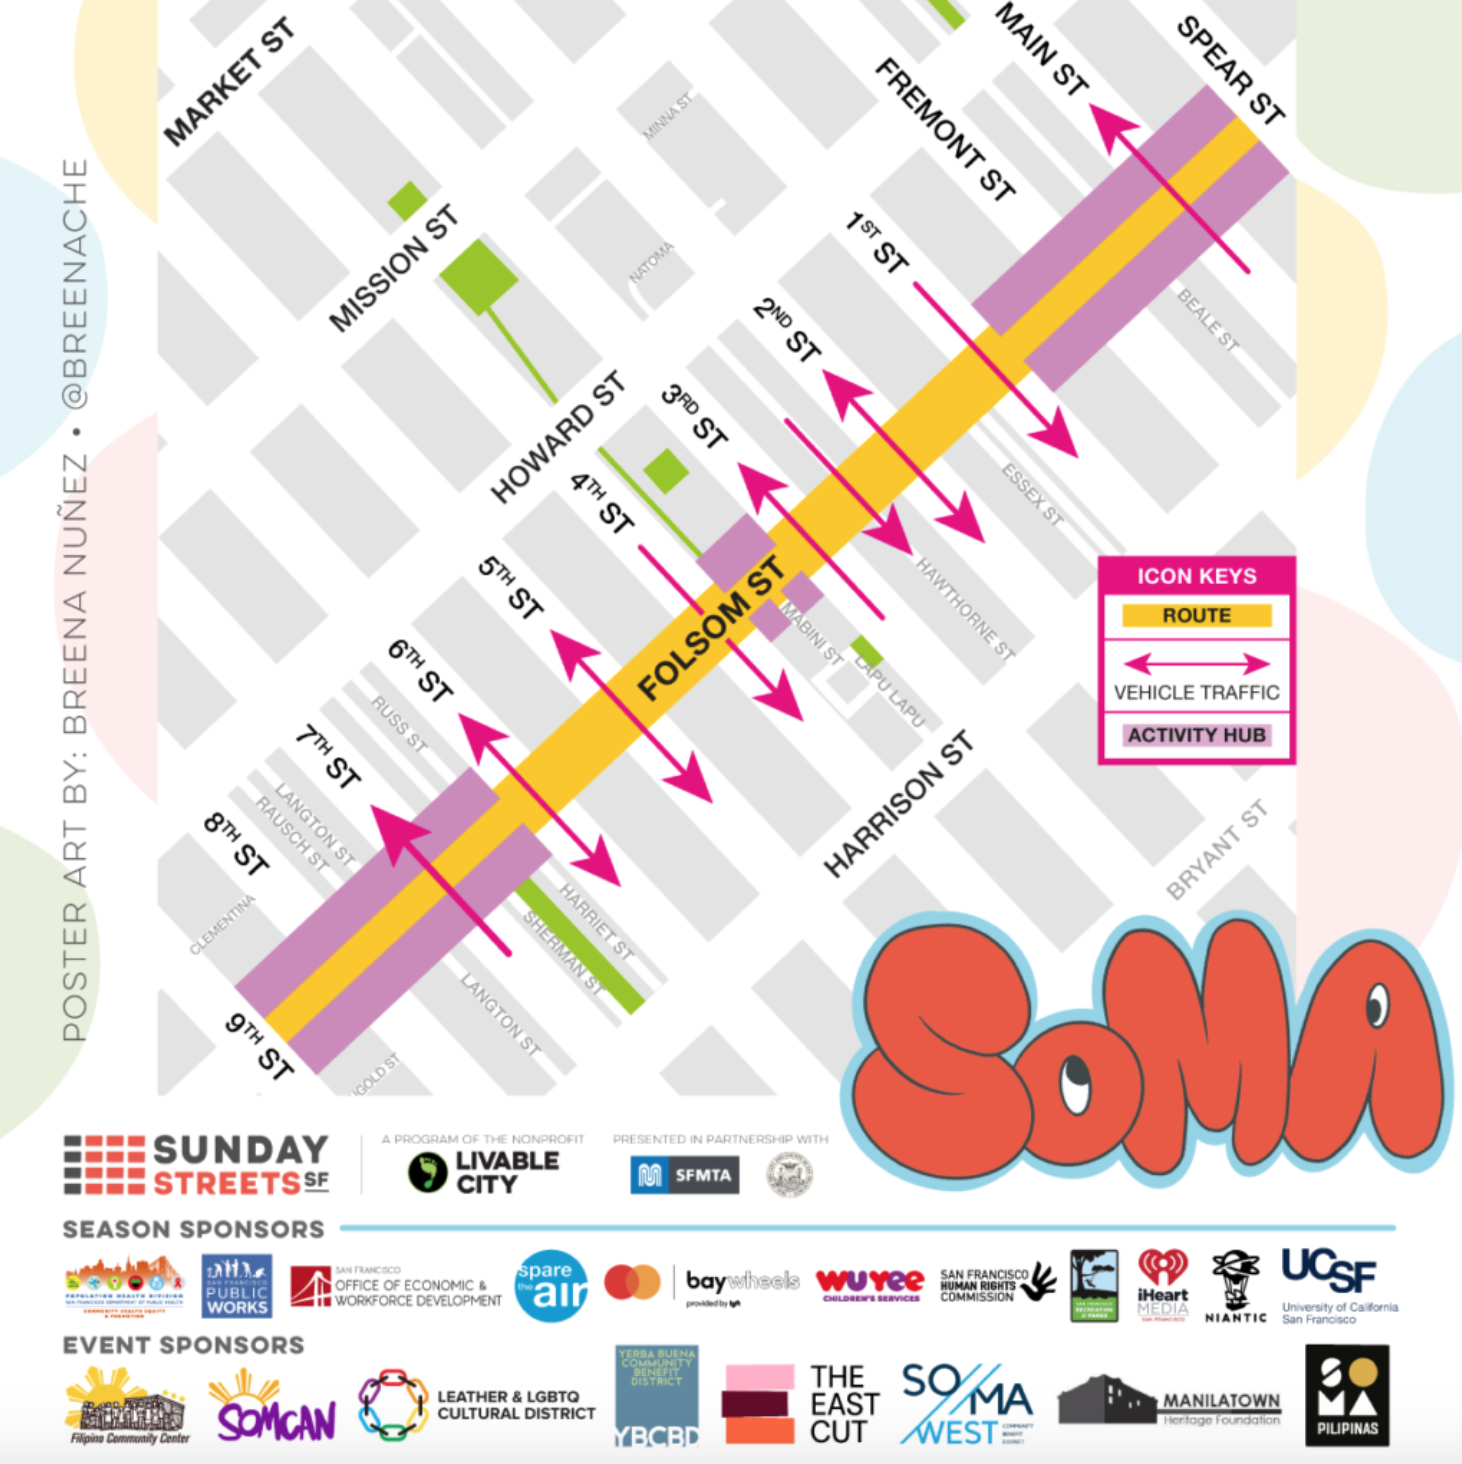 Sunday Streets SF event map